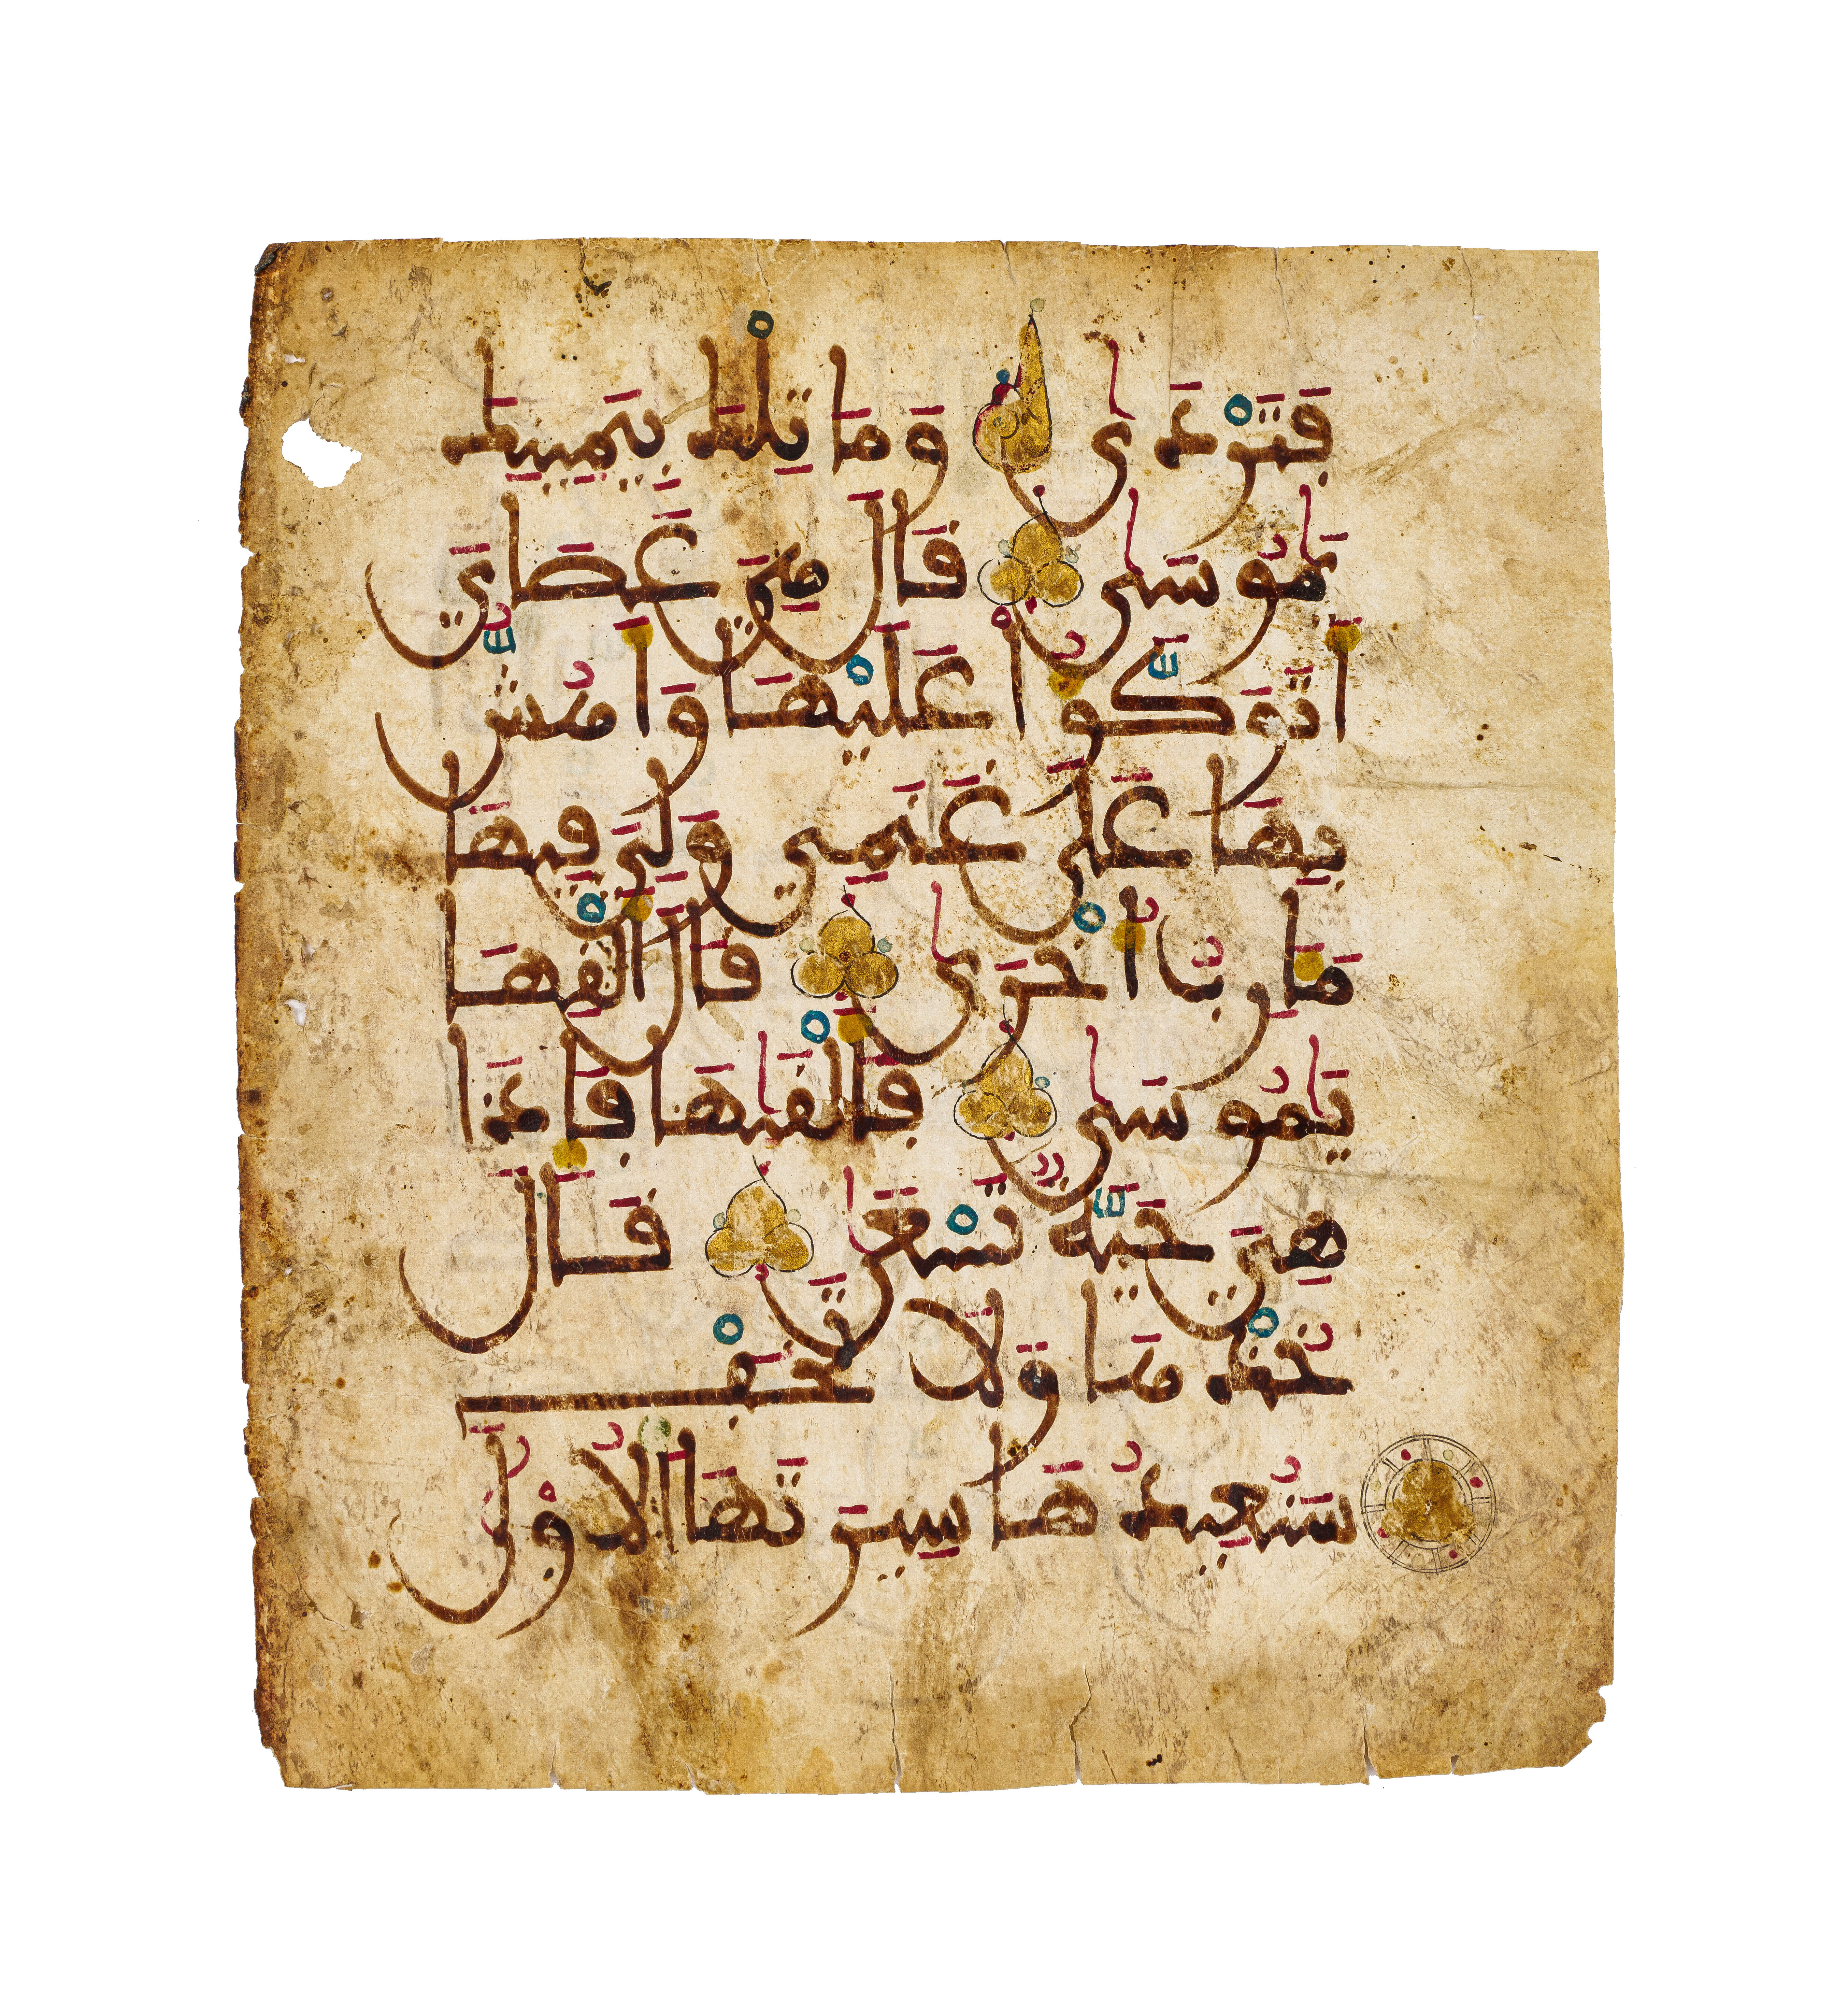 A LARGE MAGHRIBI FOLIO, NORTH AFRICA OR ANDALUSIA, 13TH CENTURY - Image 2 of 2